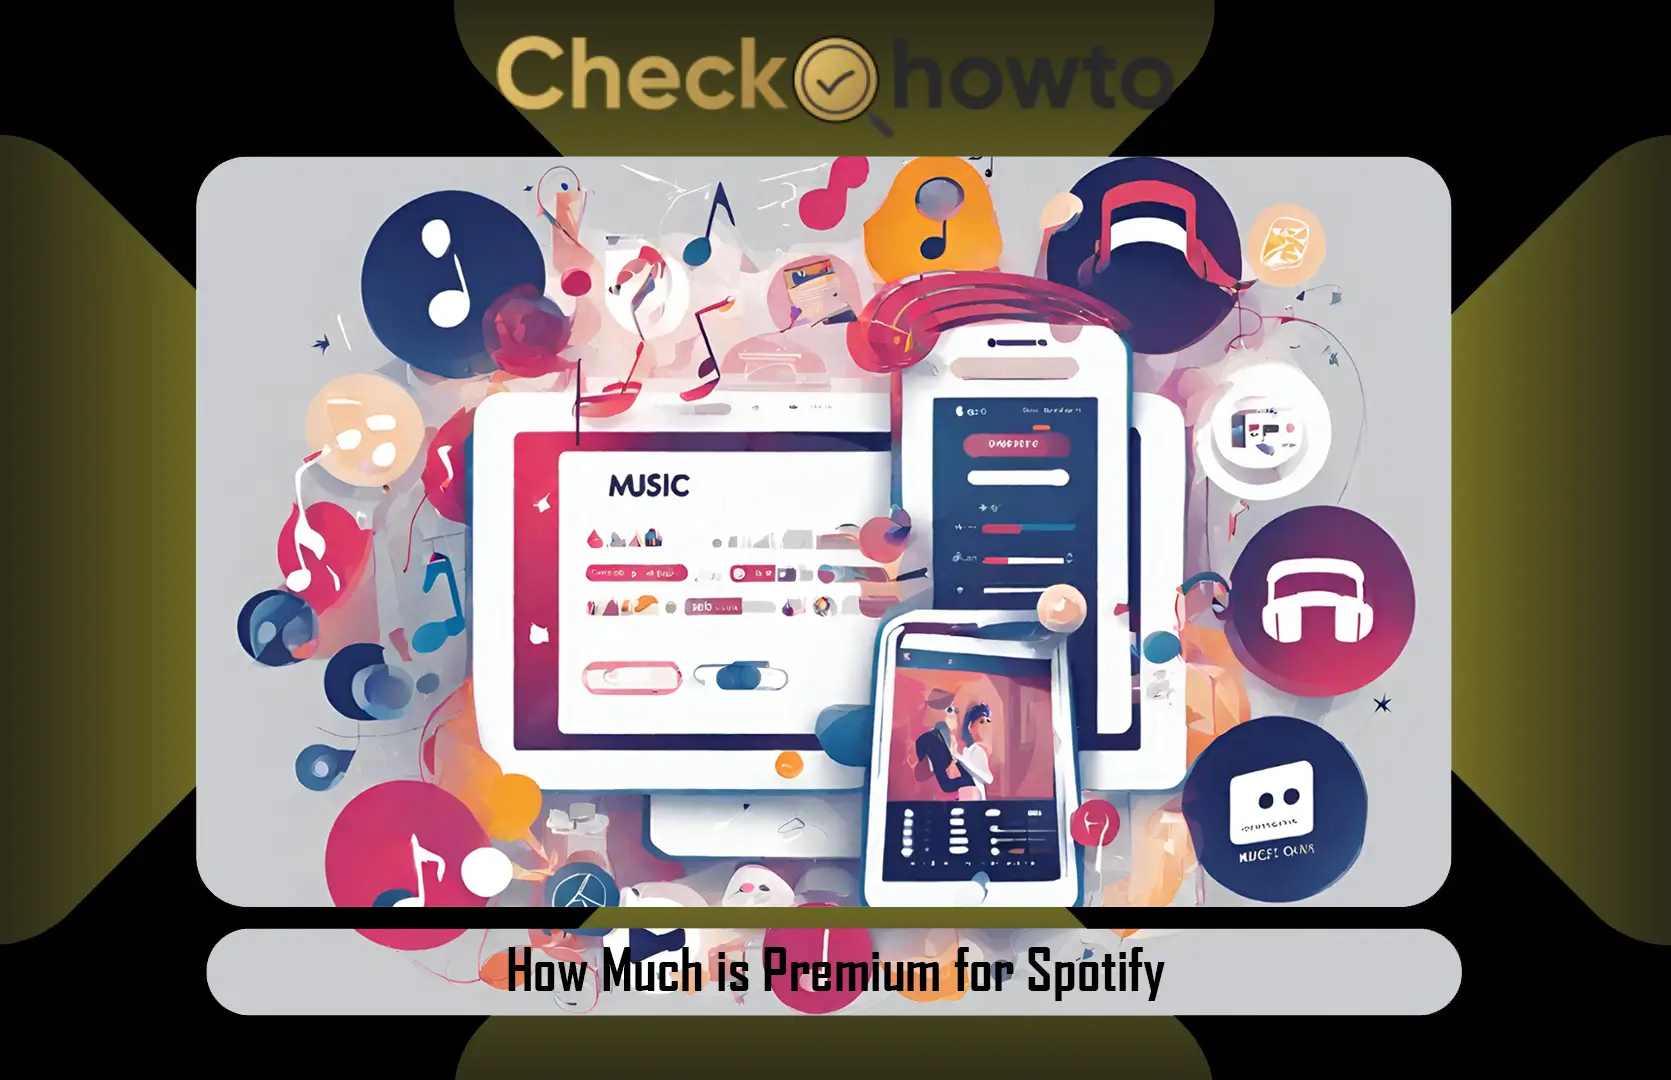 How Much is Premium for Spotify